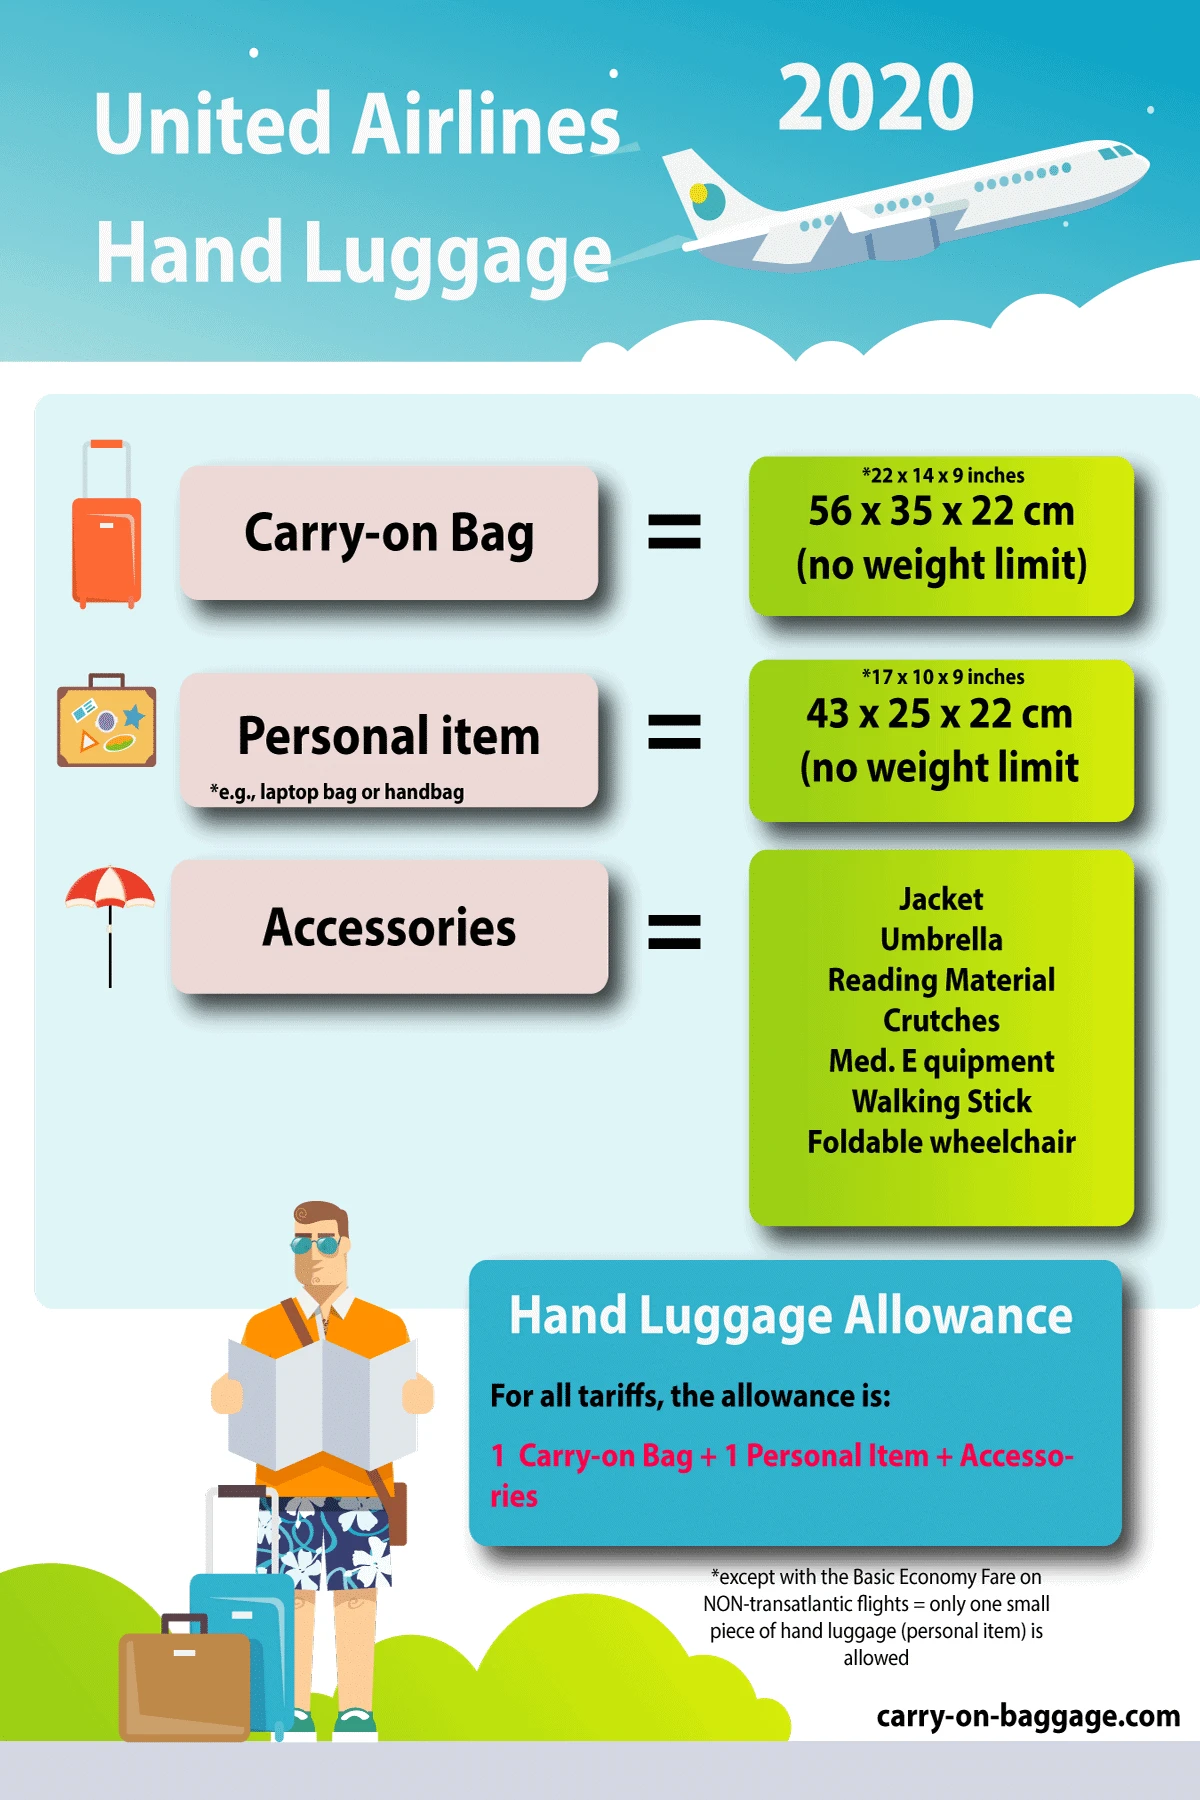 IUIGA - Very FAQs: What are the acceptable sizes for cabin luggage? How  about checked ones? 🧳🛅 Save this infographic capturing the most common luggage  sizes, which will offer an easier way